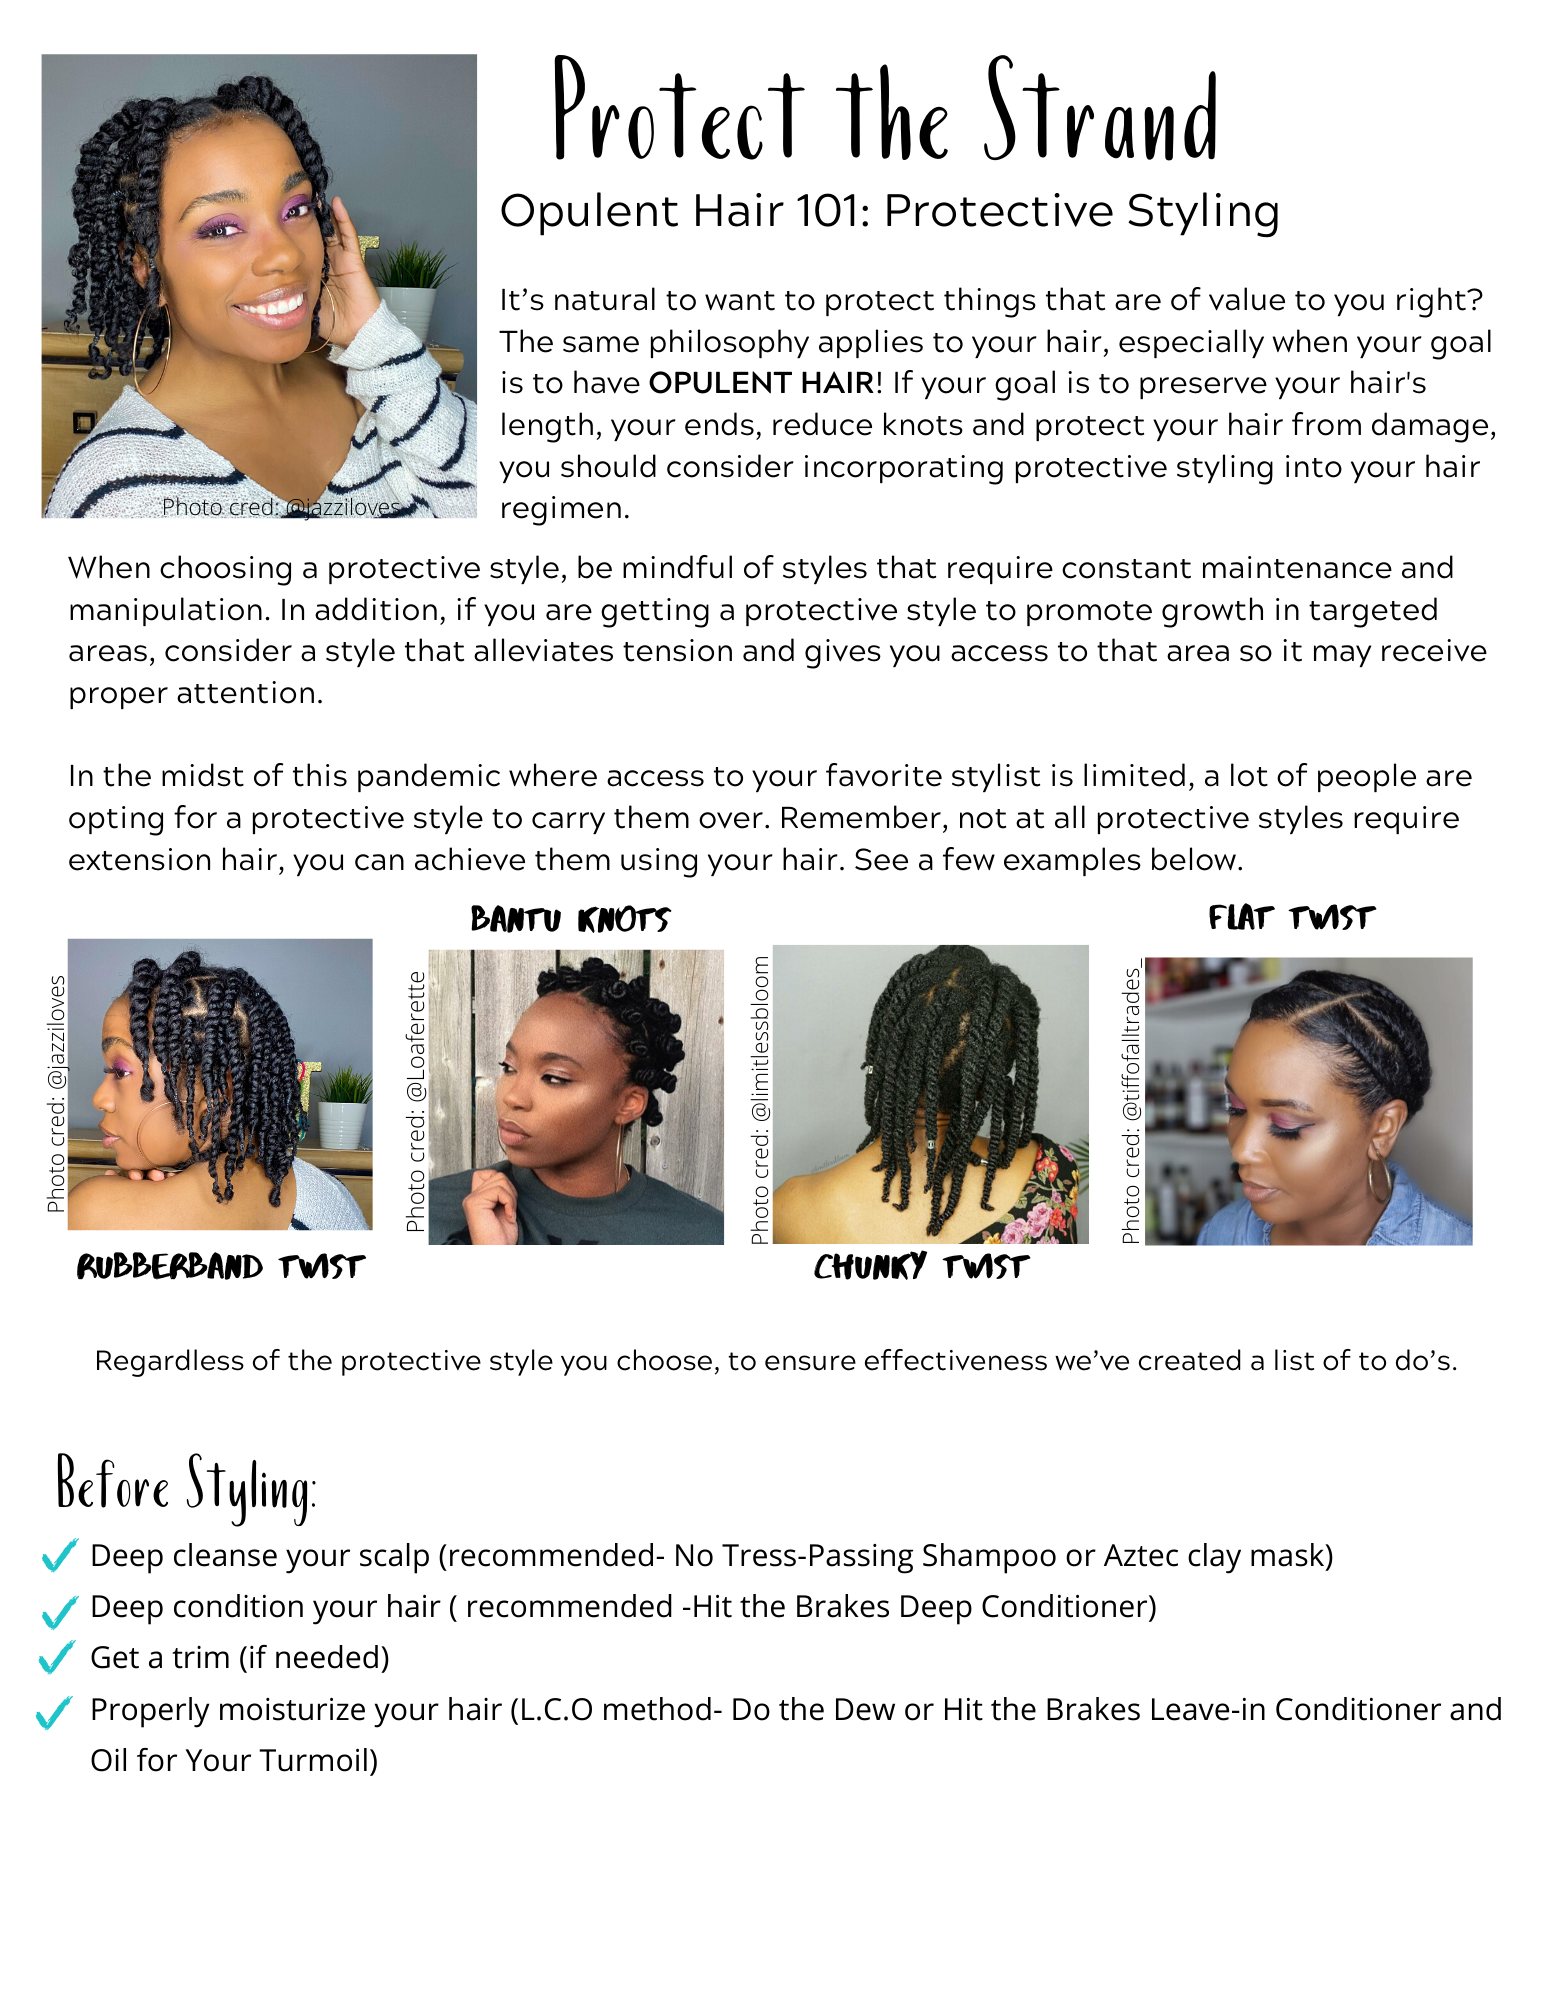 Tips for getting the best out of your protective styles